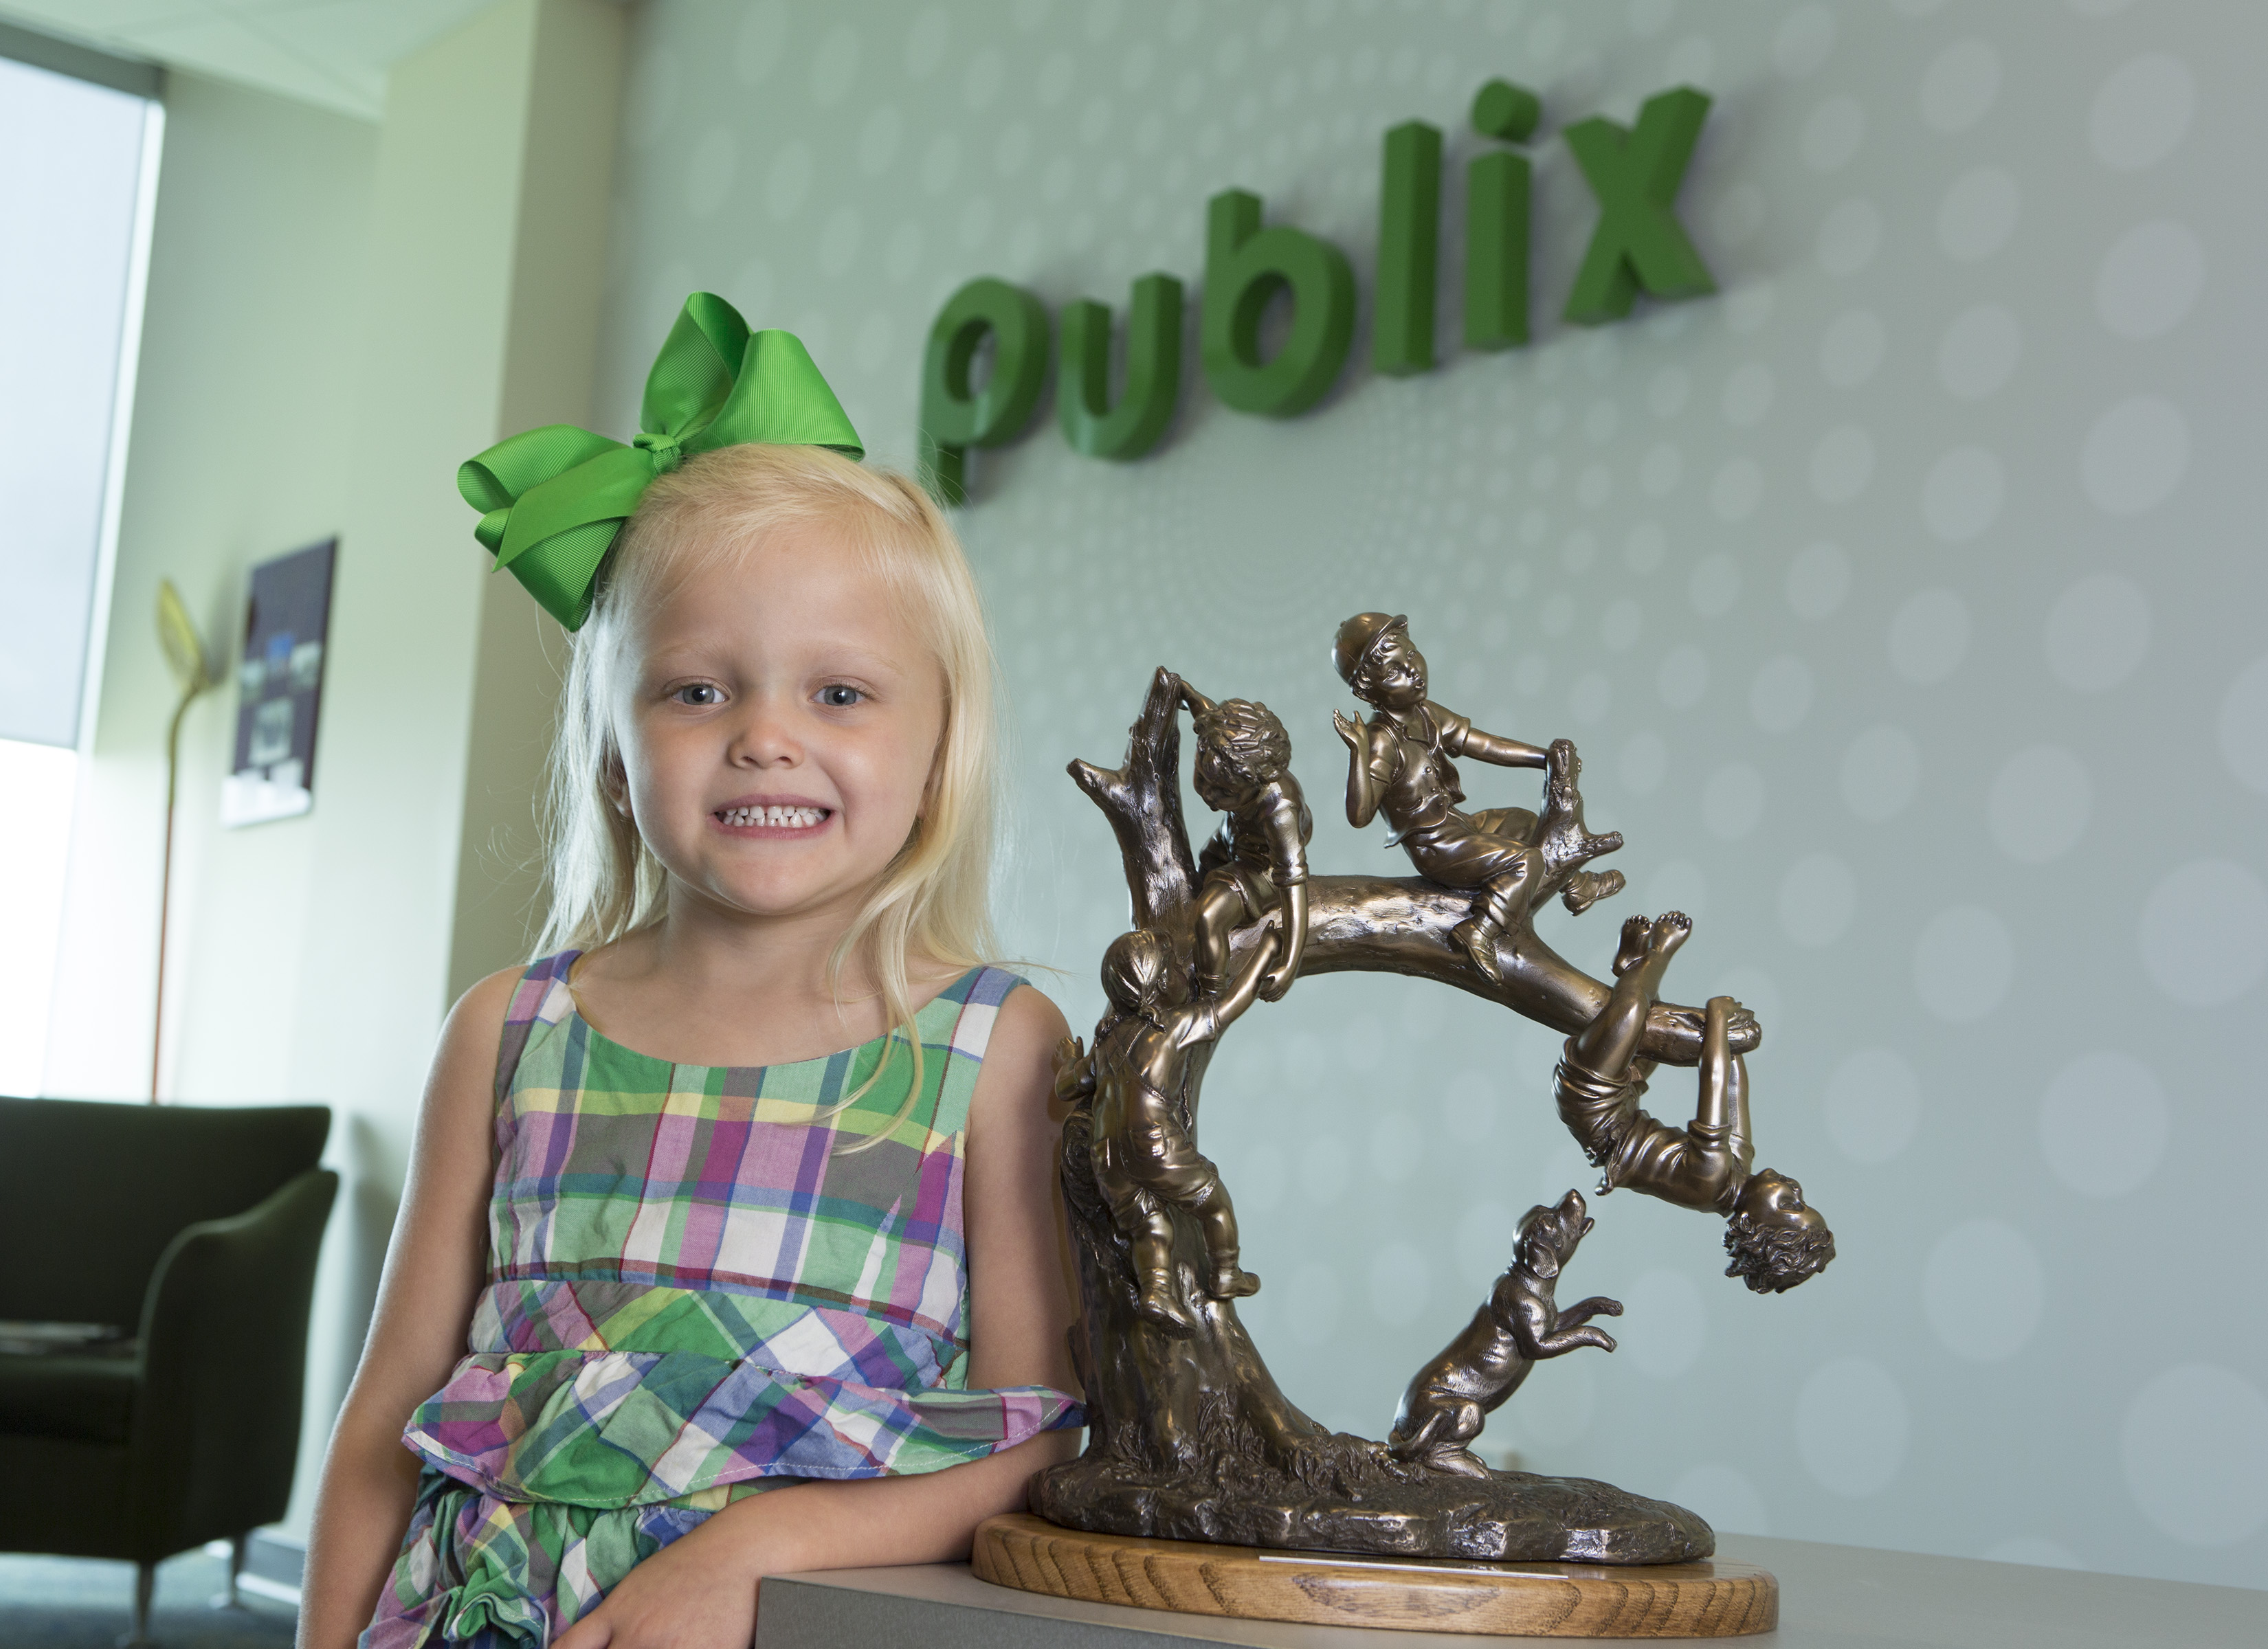 Donations made at Publix help Sally Claire’s children’s hospital be there for her and her family at each step of her medical journey.